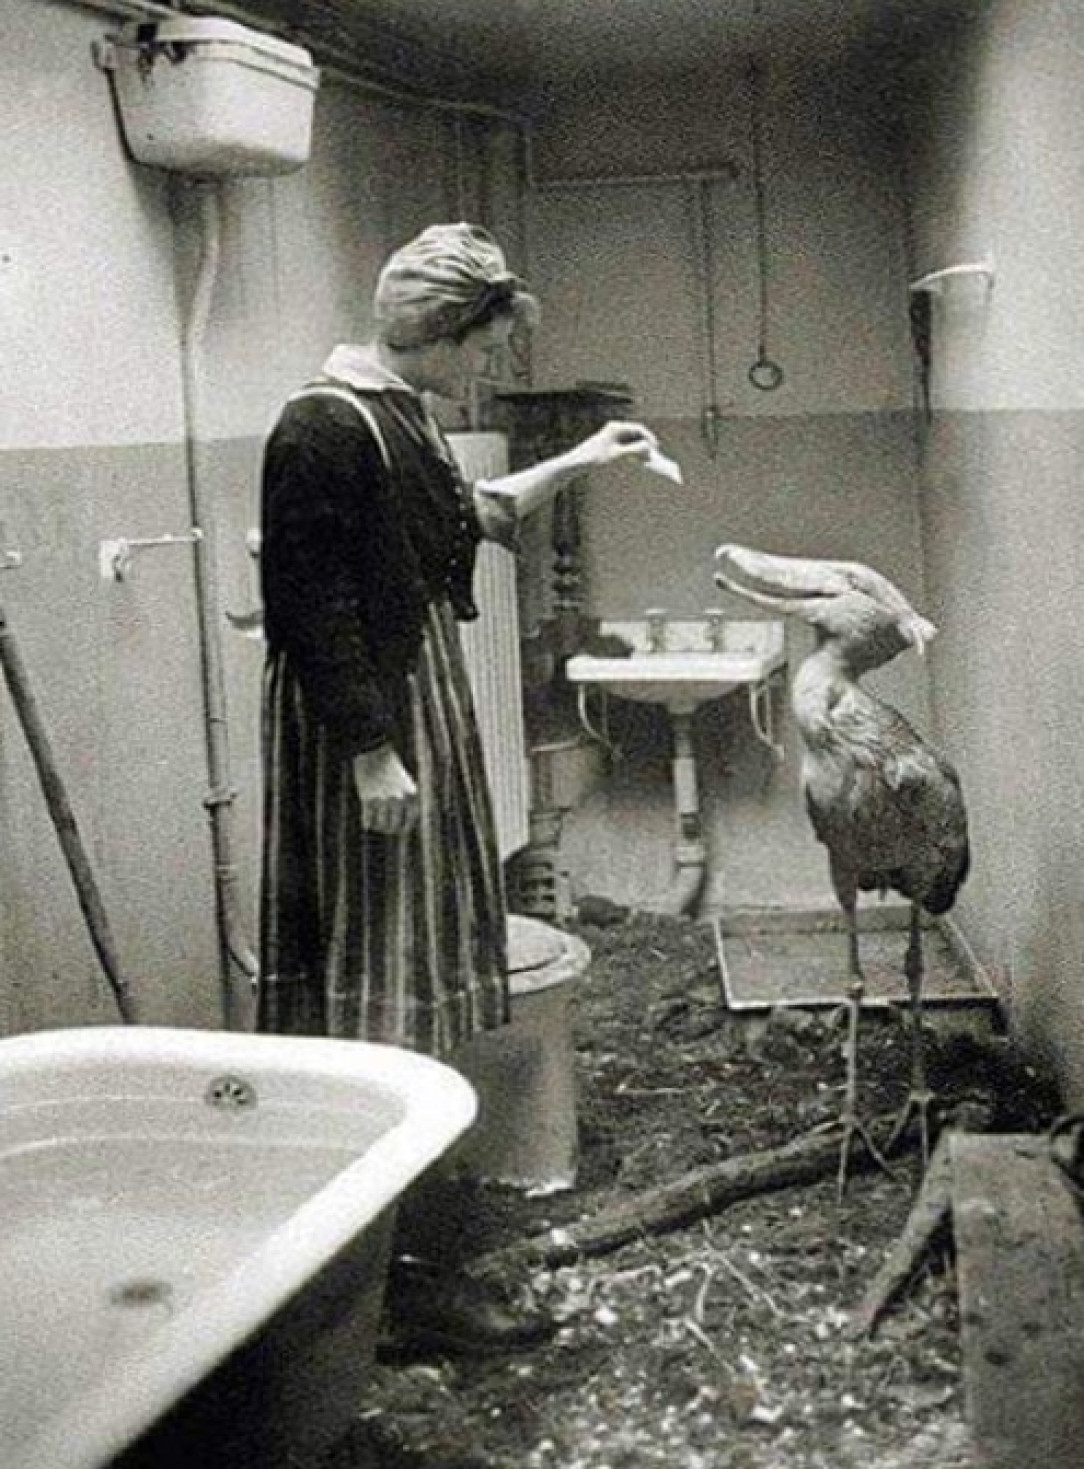 Civilians taking care of zoo animals in their own homes during WWII